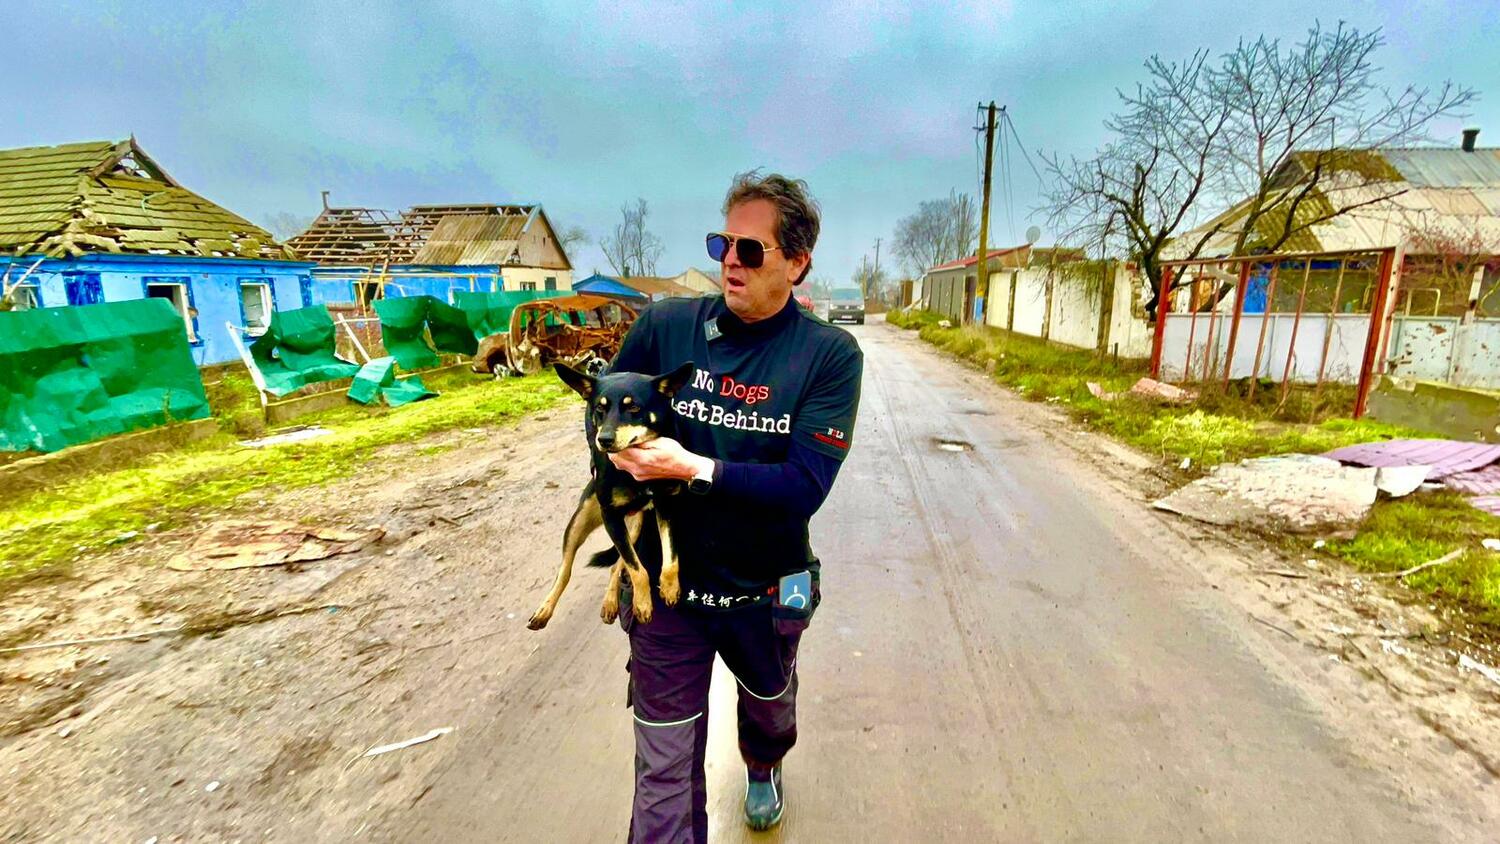 No Dogs Left Behind Founder Jeff Beri carrying Checkers, one of the dogs he recently rescued from a war zone in Ukraine.